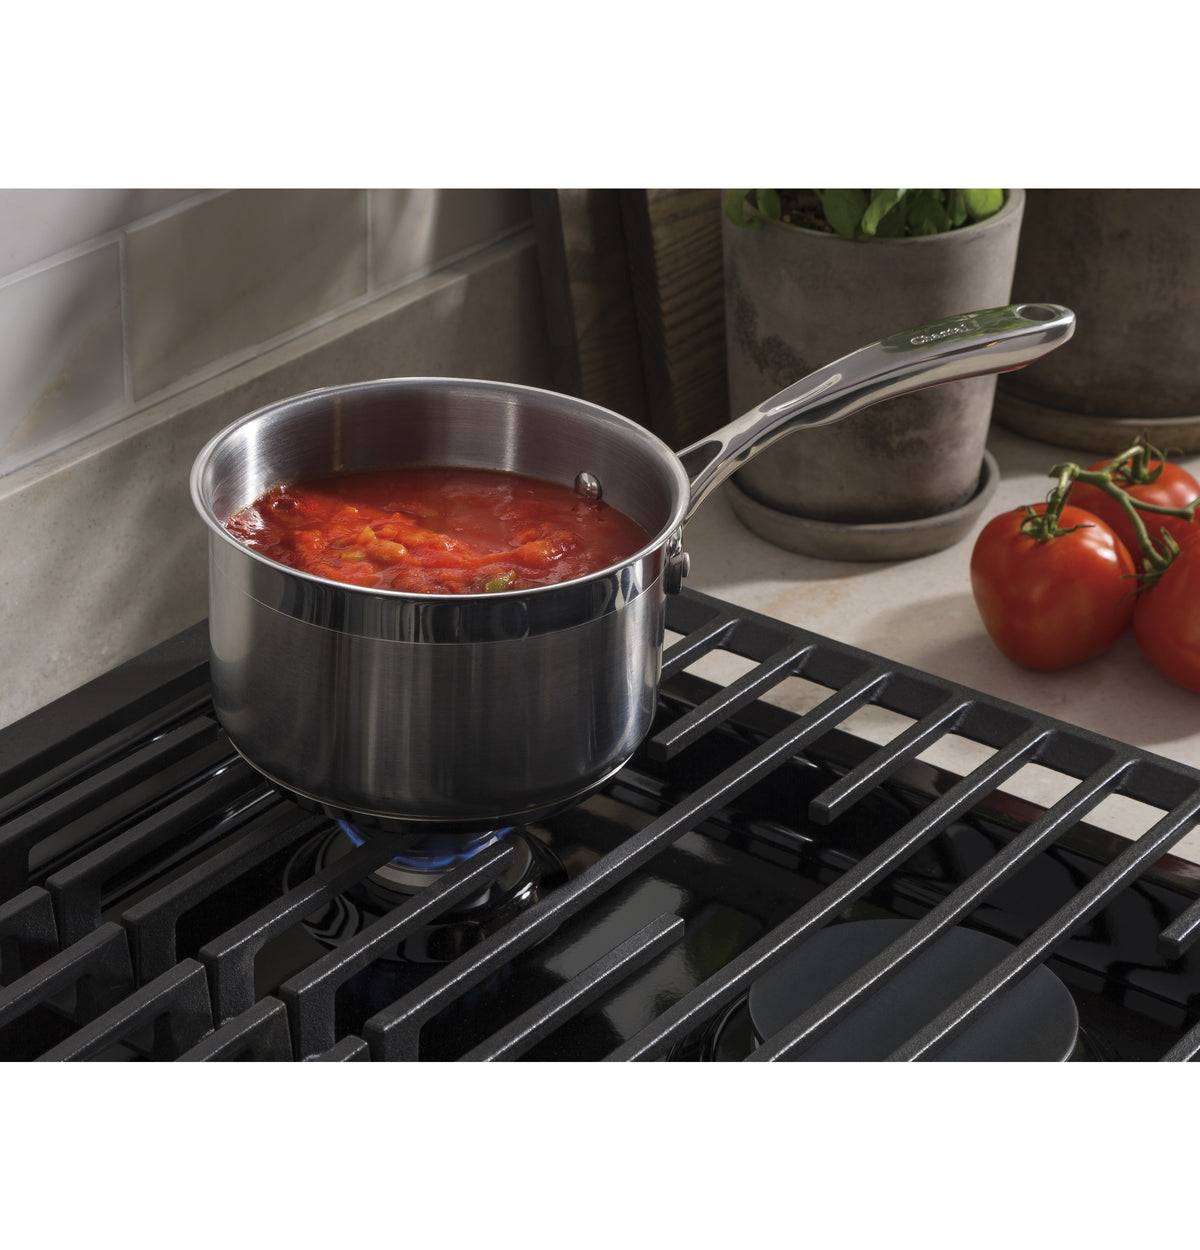 https://www.geaprusa.shop/wp-content/uploads/1693/72/explore-a-world-of-endless-possibilities-and-ge-profile-30-built-in-gas-cooktop-with-5-burners-and-optional-extra-large-cast-iron-griddle-ge-appliances-pr-online-store-x_3.jpg